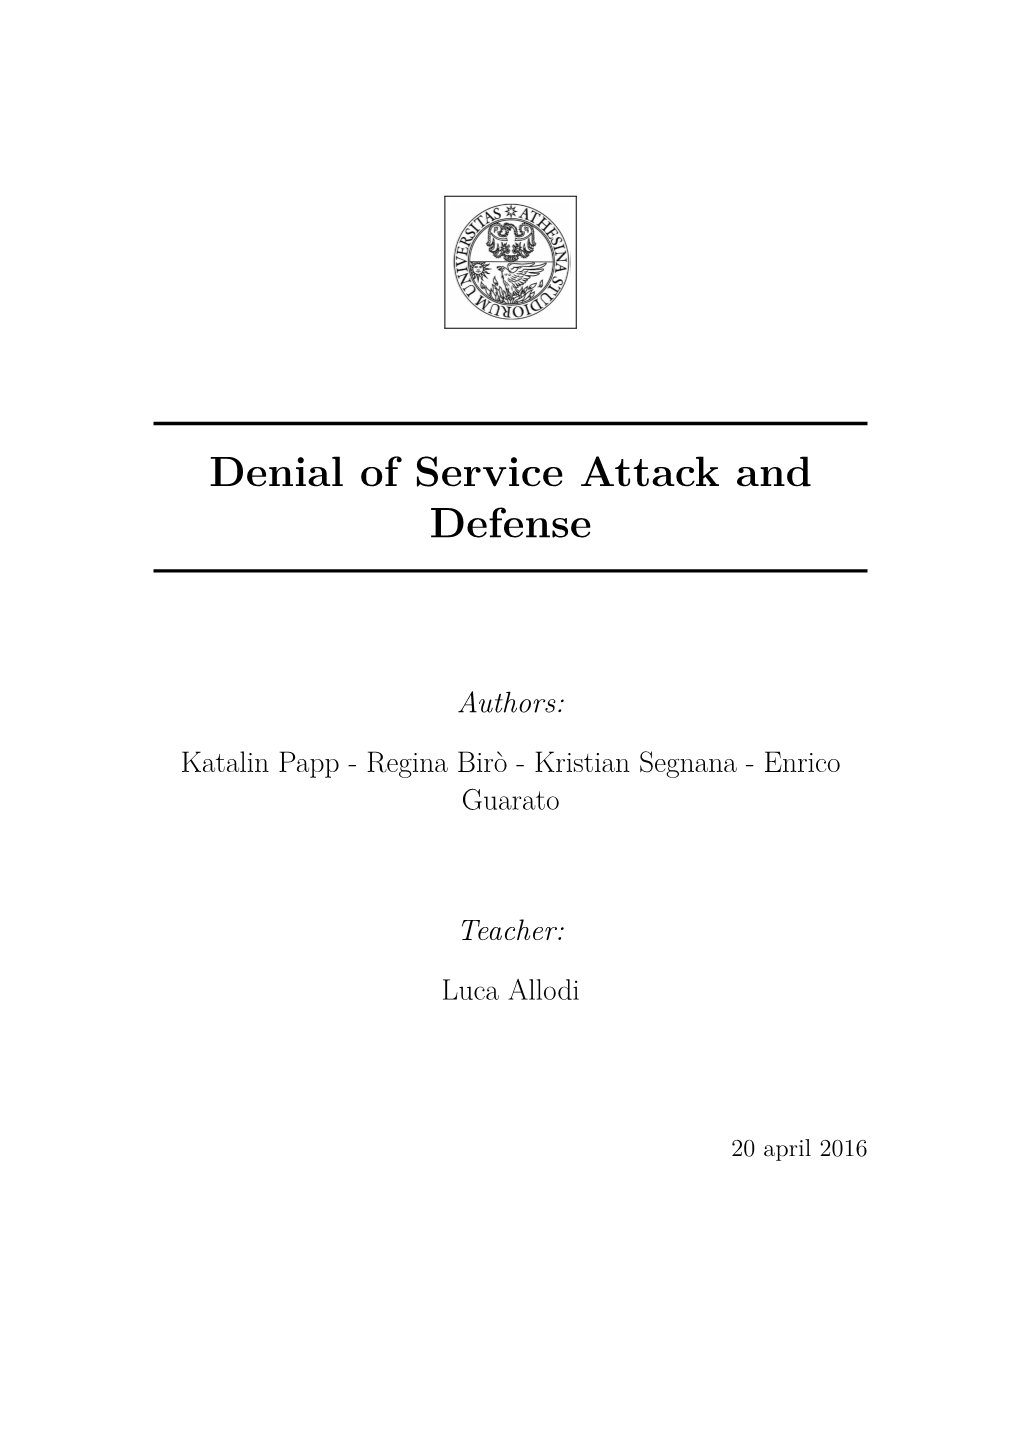 Denial of Service Attack and Defense